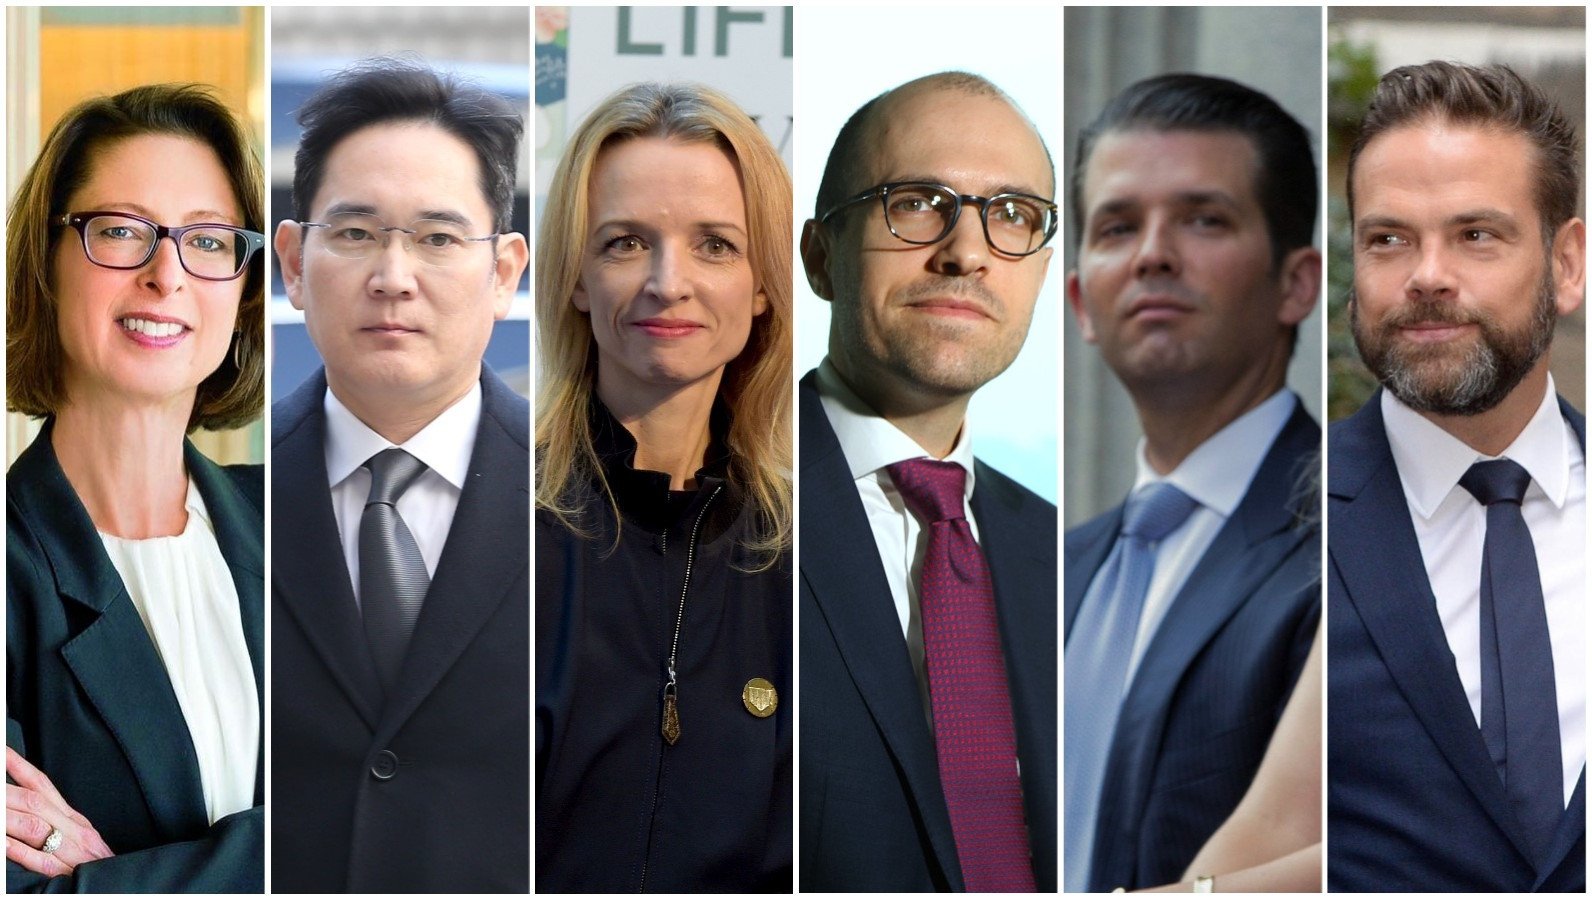 Being born into a corporate empire certainly has its perks for Abigail Johnson, Jay Y. Lee, Delphine Arnault, A.G. Sulzberger, Donald Trump Jr. and Lachlan Murdoch. Photos: @eho.capital/Instagram, EPA-EFE, AFP, SCMP, AP, TNS